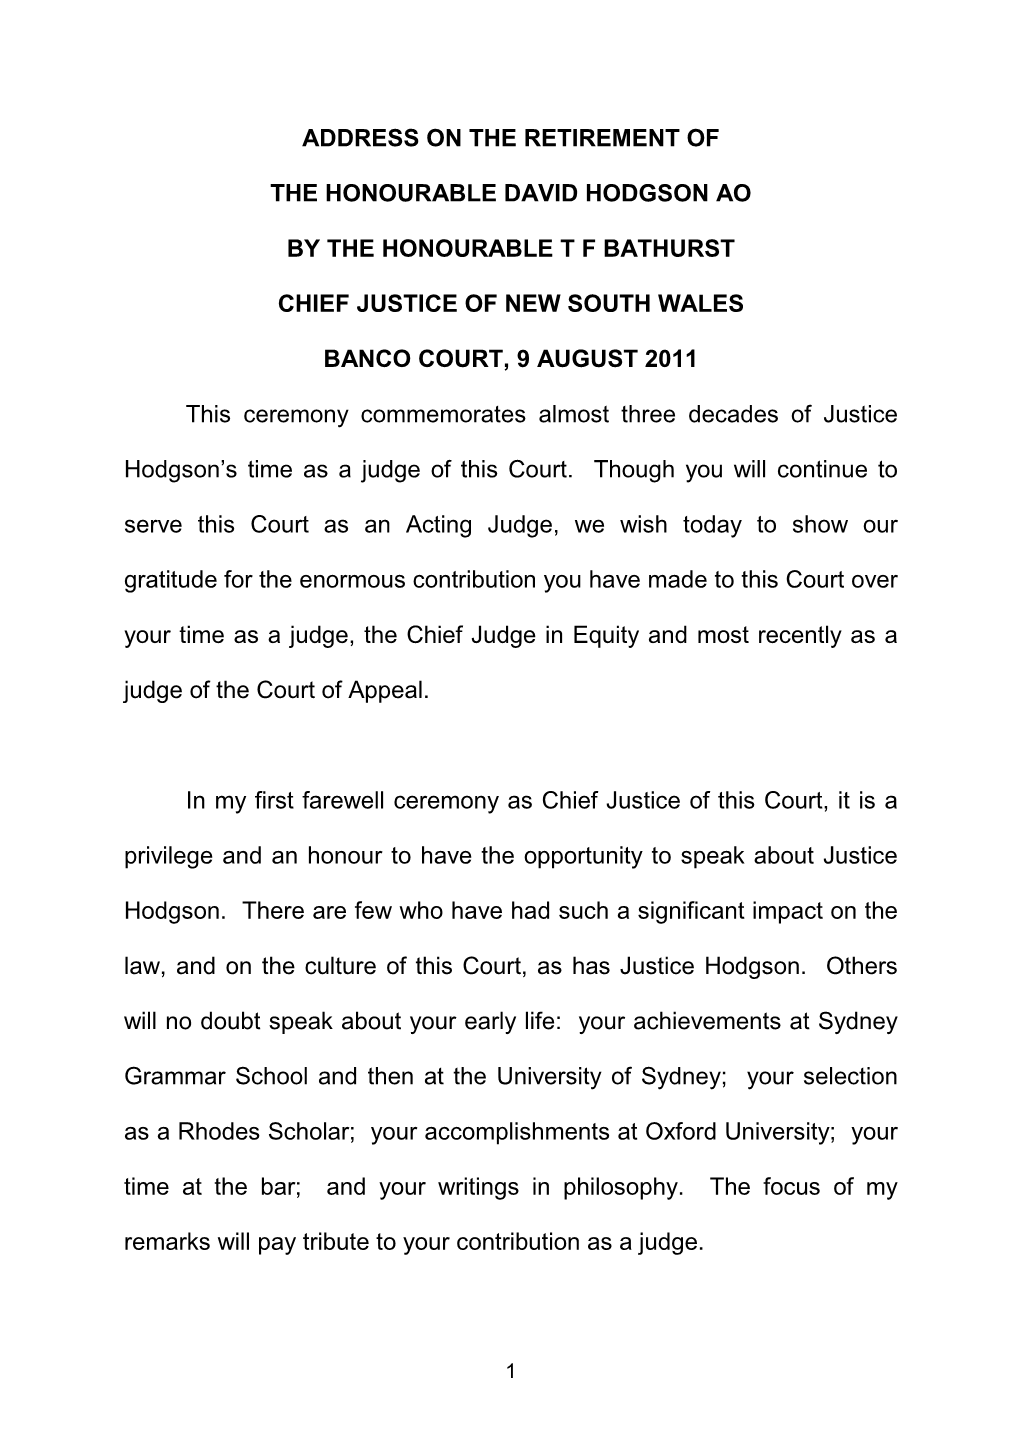 Address on the Retirement of the Honourable David Hodgson Ao by the Honourable T F Bathurst Chief Justice of New South Wales Ba